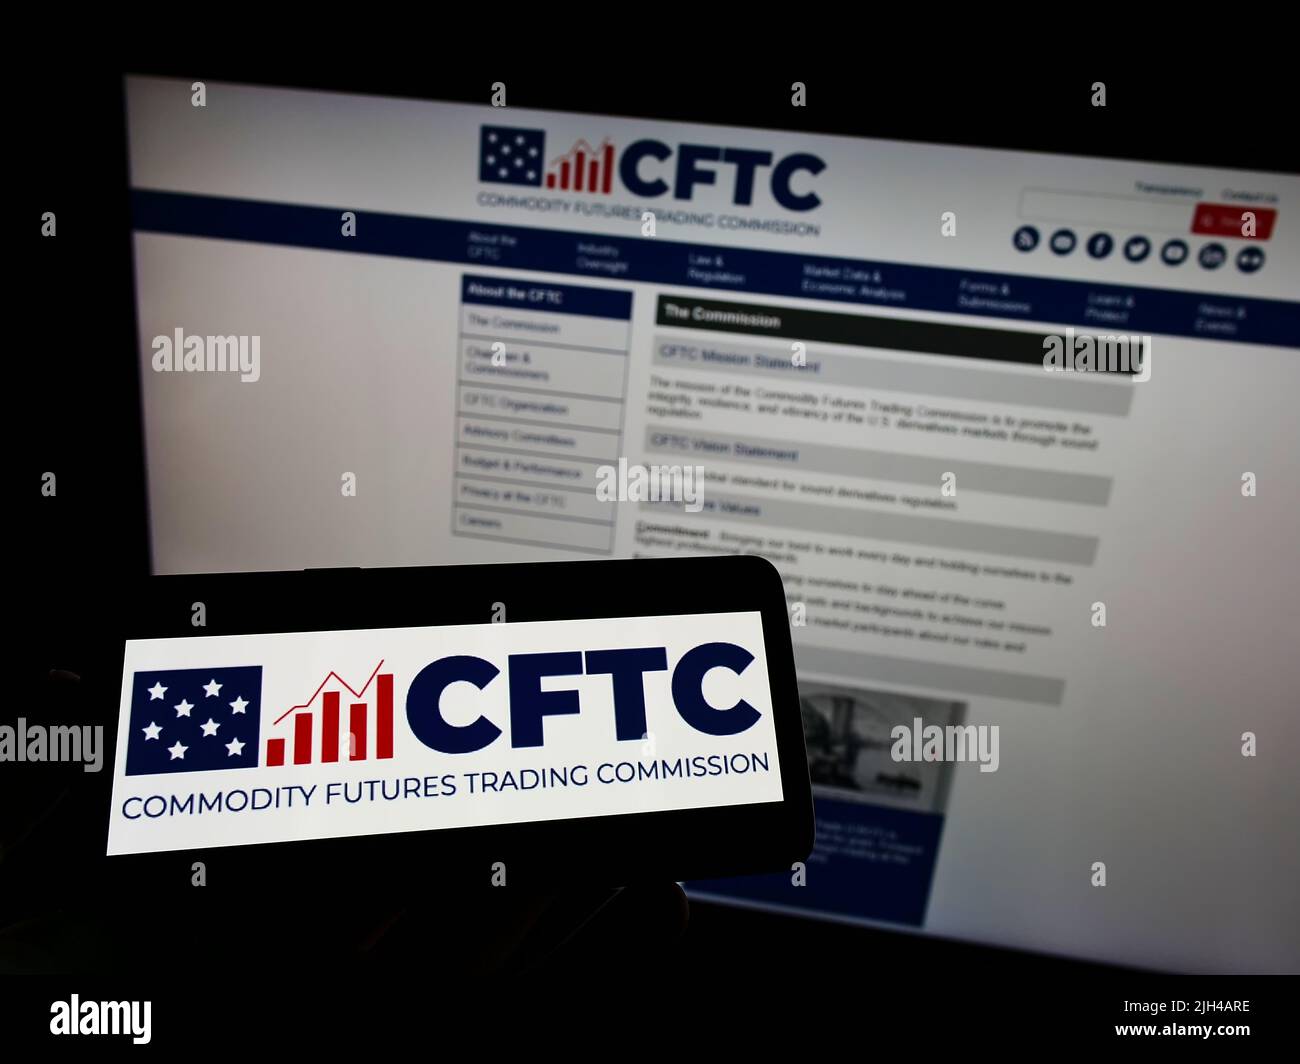 Person holding mobile phone with logo of US Commodity Futures Trading Commission (CFTC) on screen in front of web page. Focus on phone display. Stock Photo